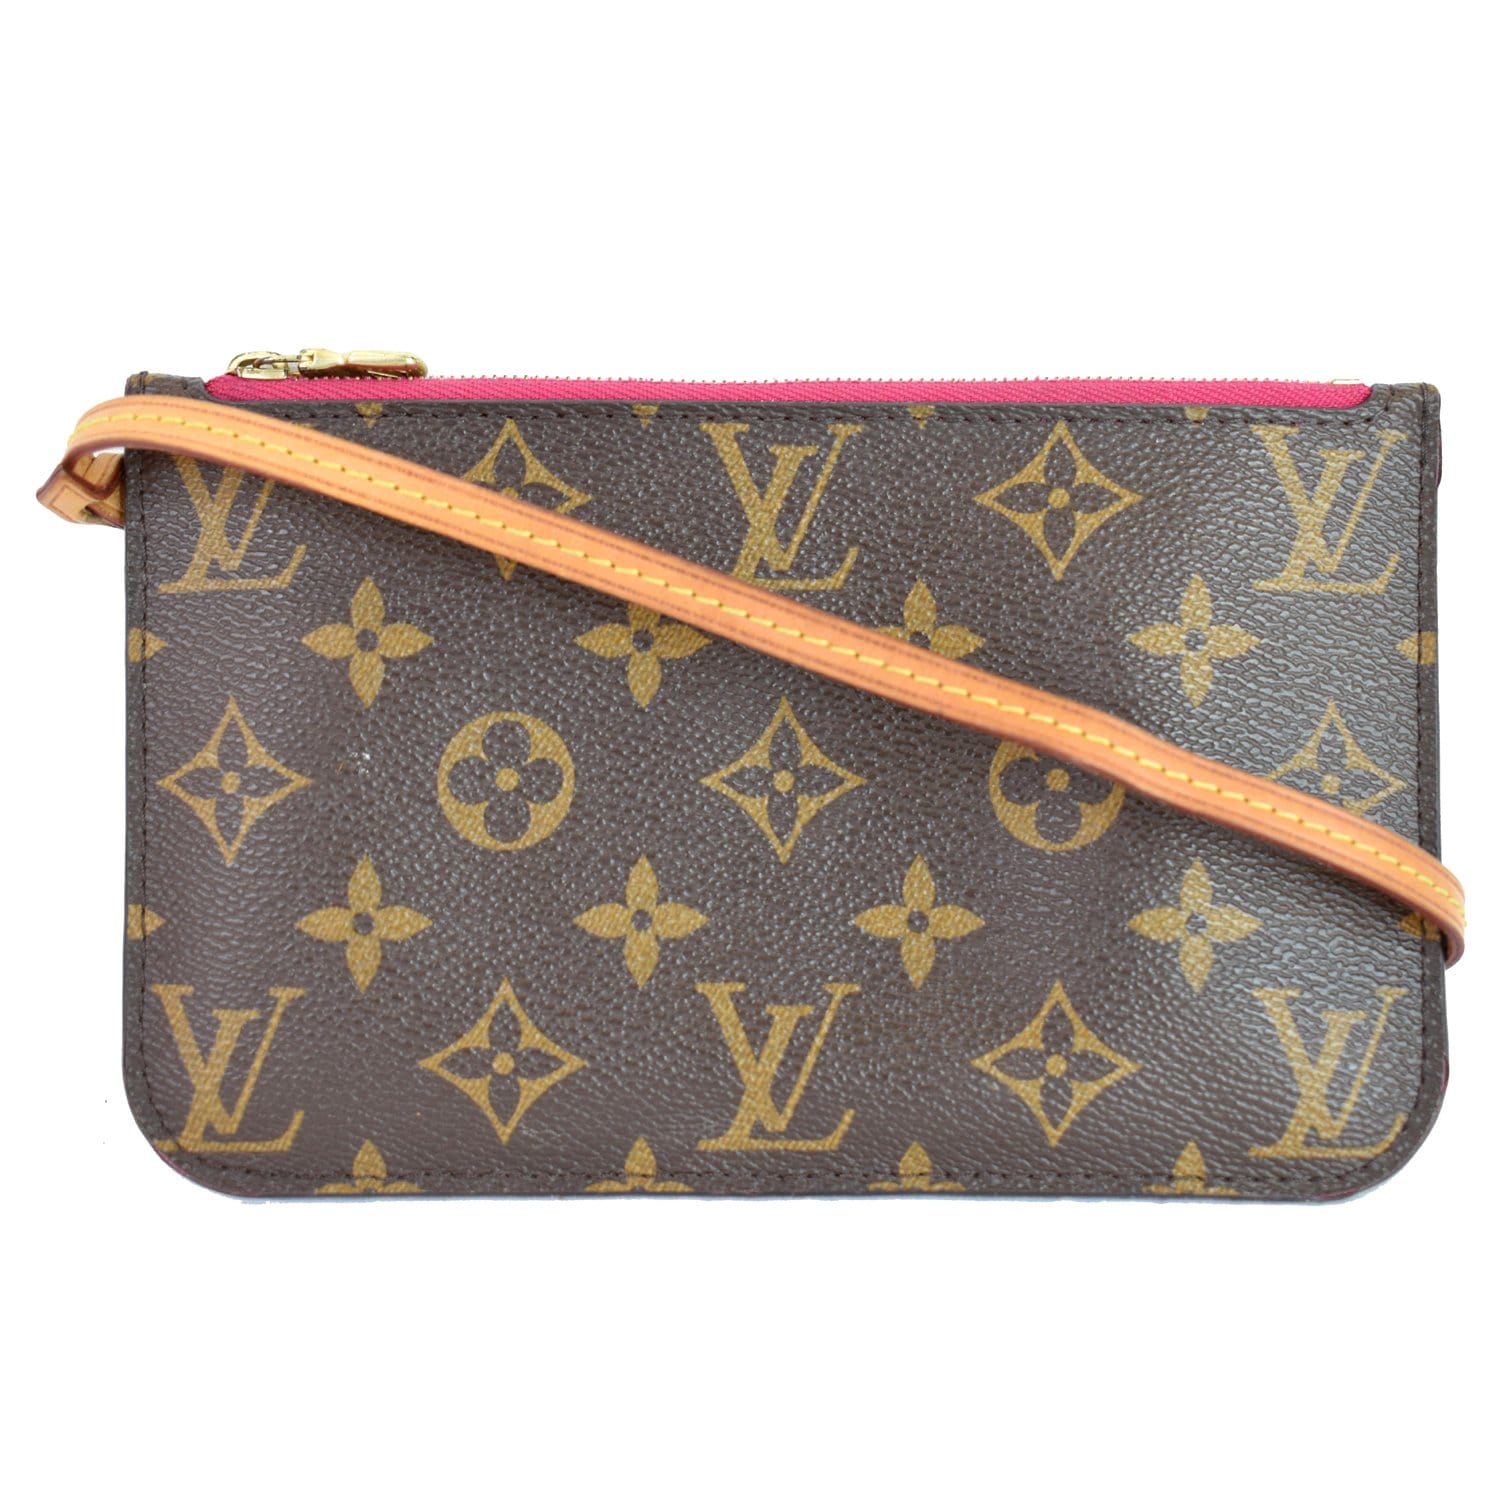 Pre - Vintage - Owned Louis Vuitton Bags for pochette - neverfull